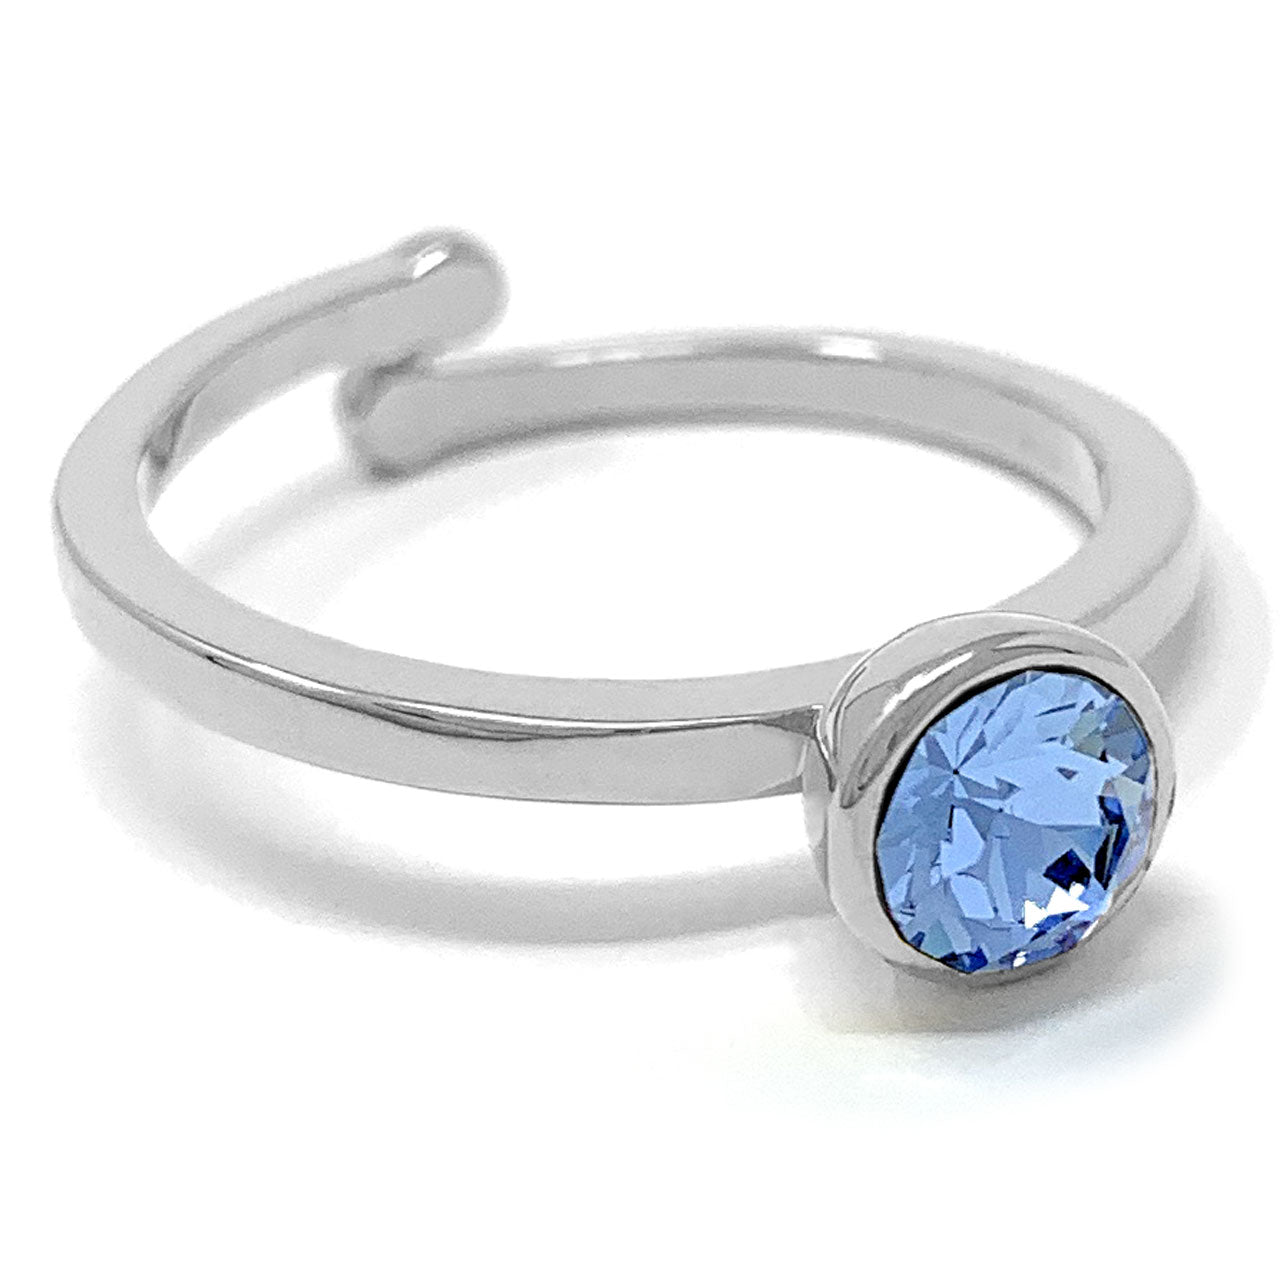 Harley Adjustable Ring with Blue Light Sapphire Round Crystals from Swarovski Silver Toned Rhodium Plated - Ed Heart